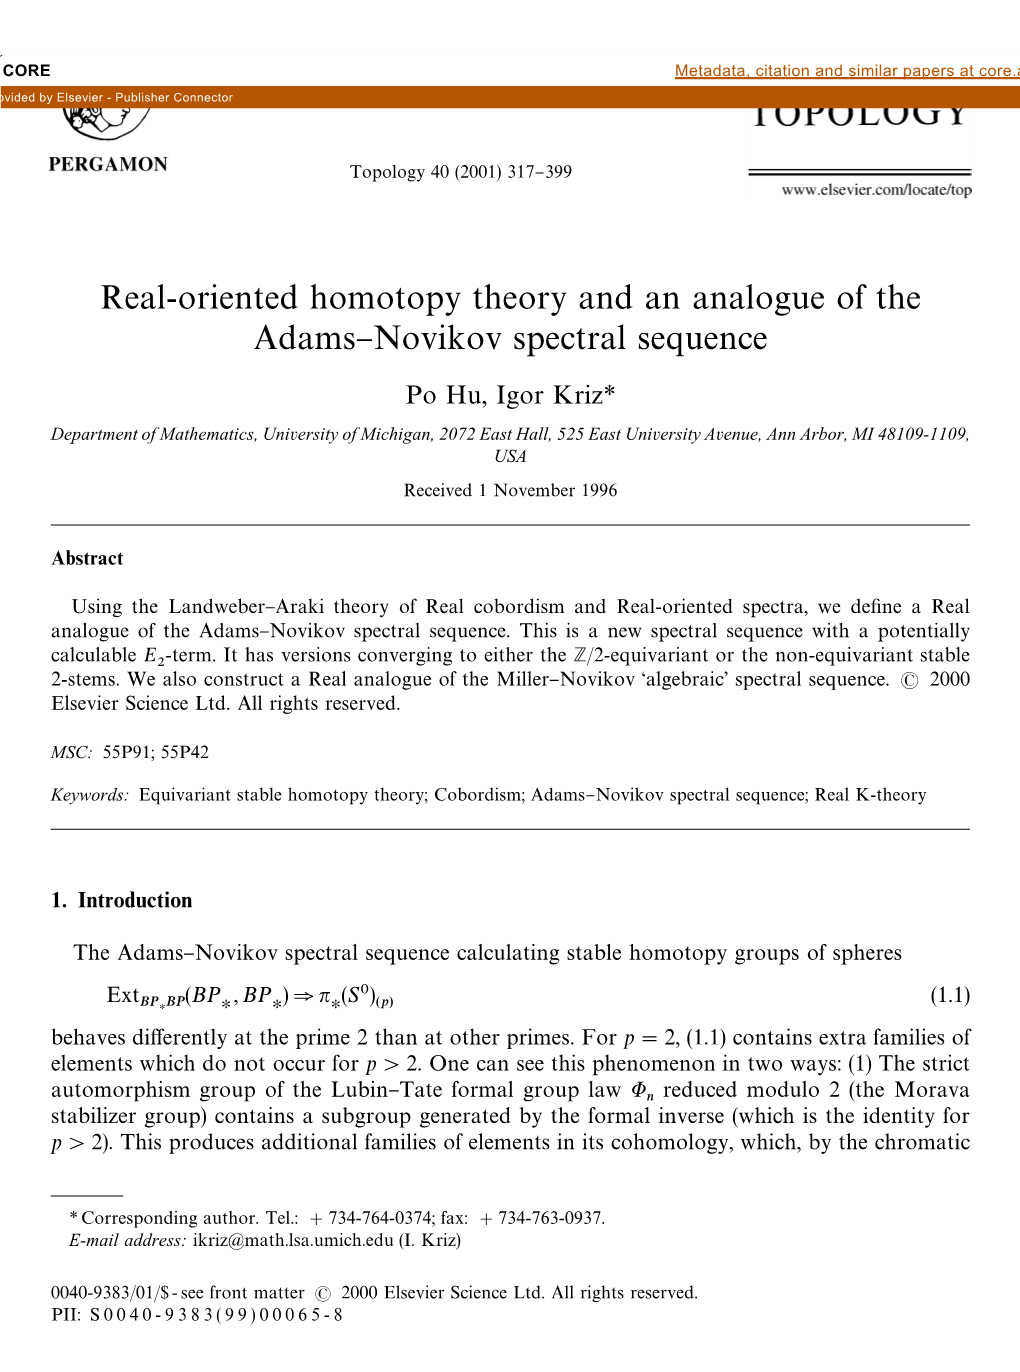 Real-Oriented Homotopy Theory and an Analogue of the Adams}Novikov Spectral Sequence